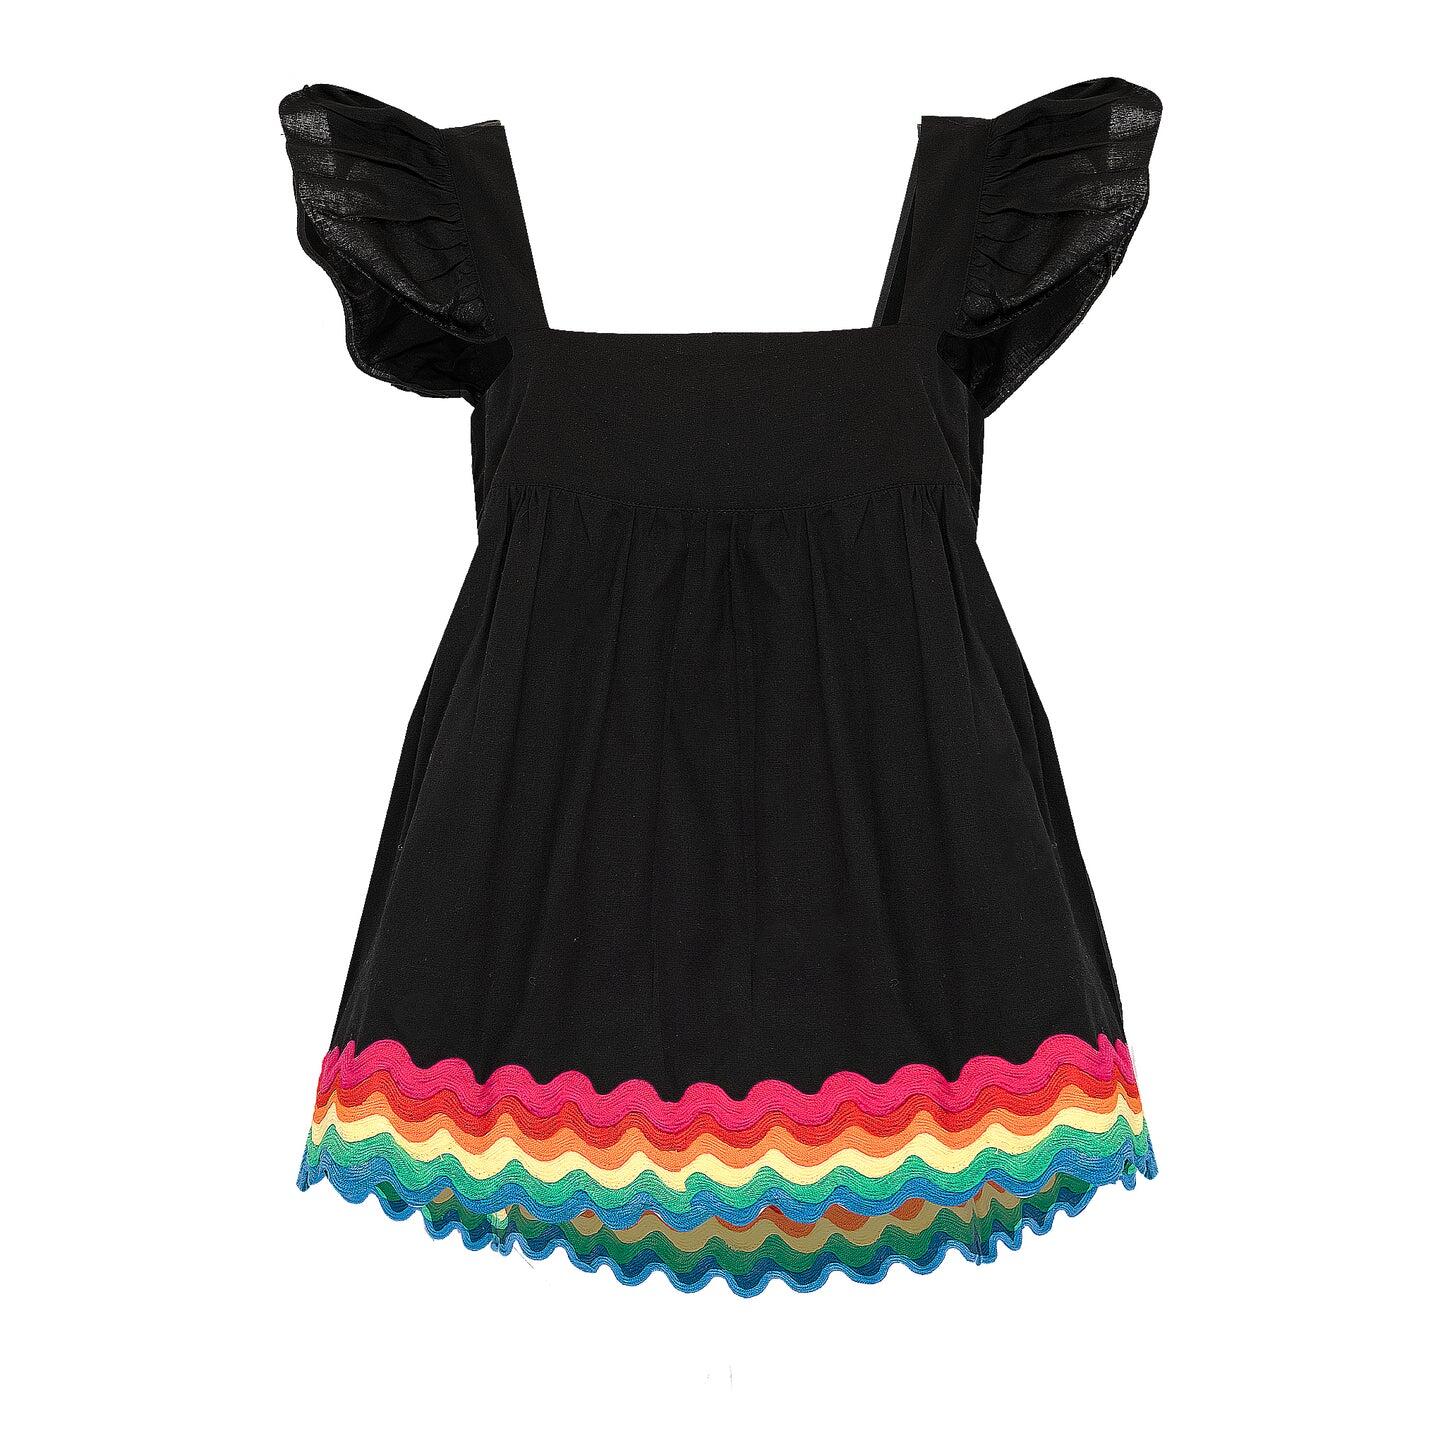 Load image into Gallery viewer, Baby Doll Top with Rainbow Ric Rac Trim - Lined Black/Rainbow Bright
